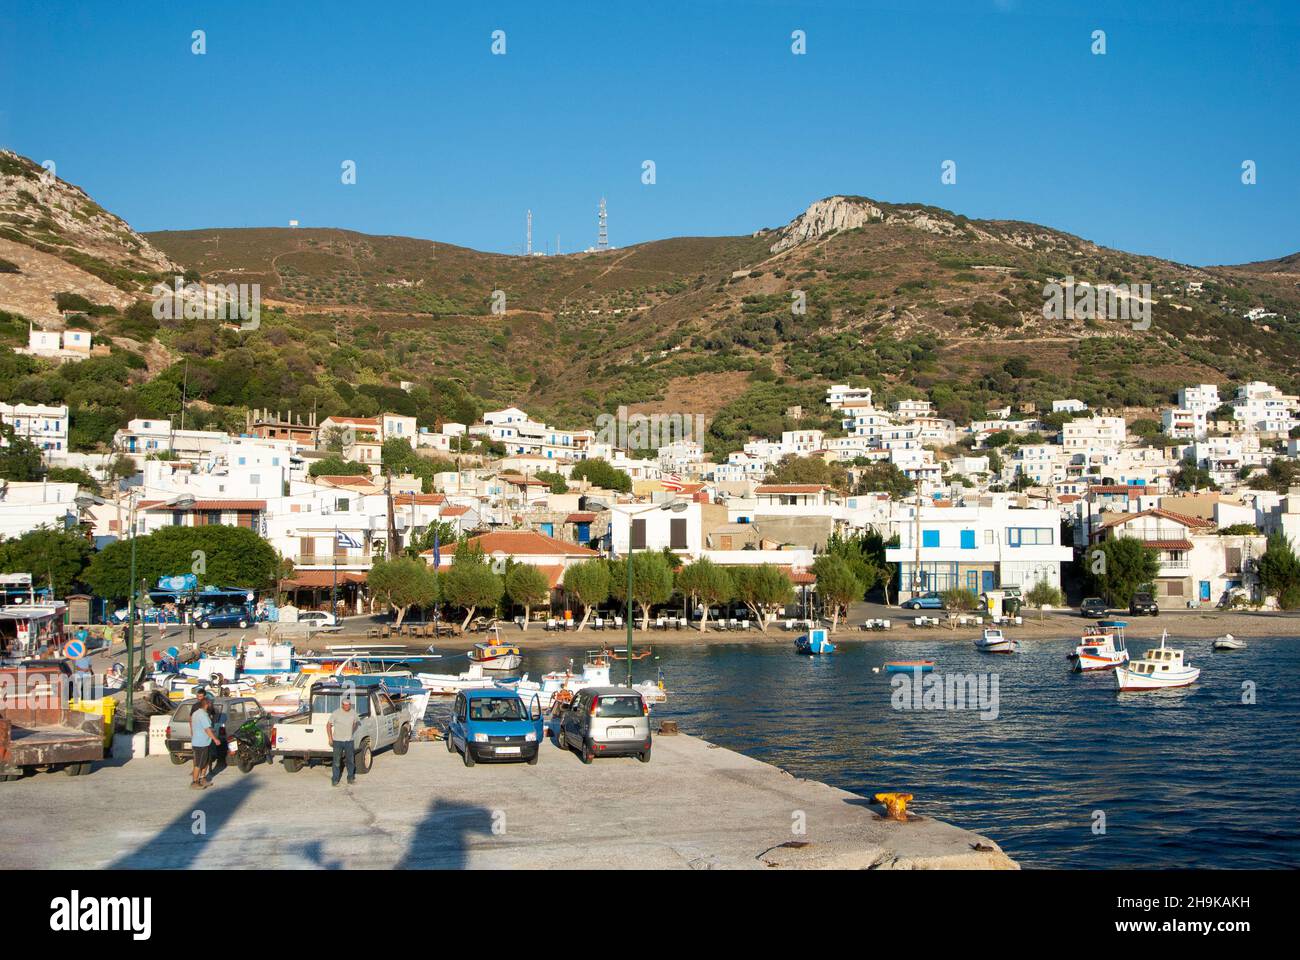 Fourni isle - Greece - September 1 2014 : Beautiful Greek island. Busy harbor and waterfront in a charming bay. Landscape aspect shot.  Copy space. Stock Photo